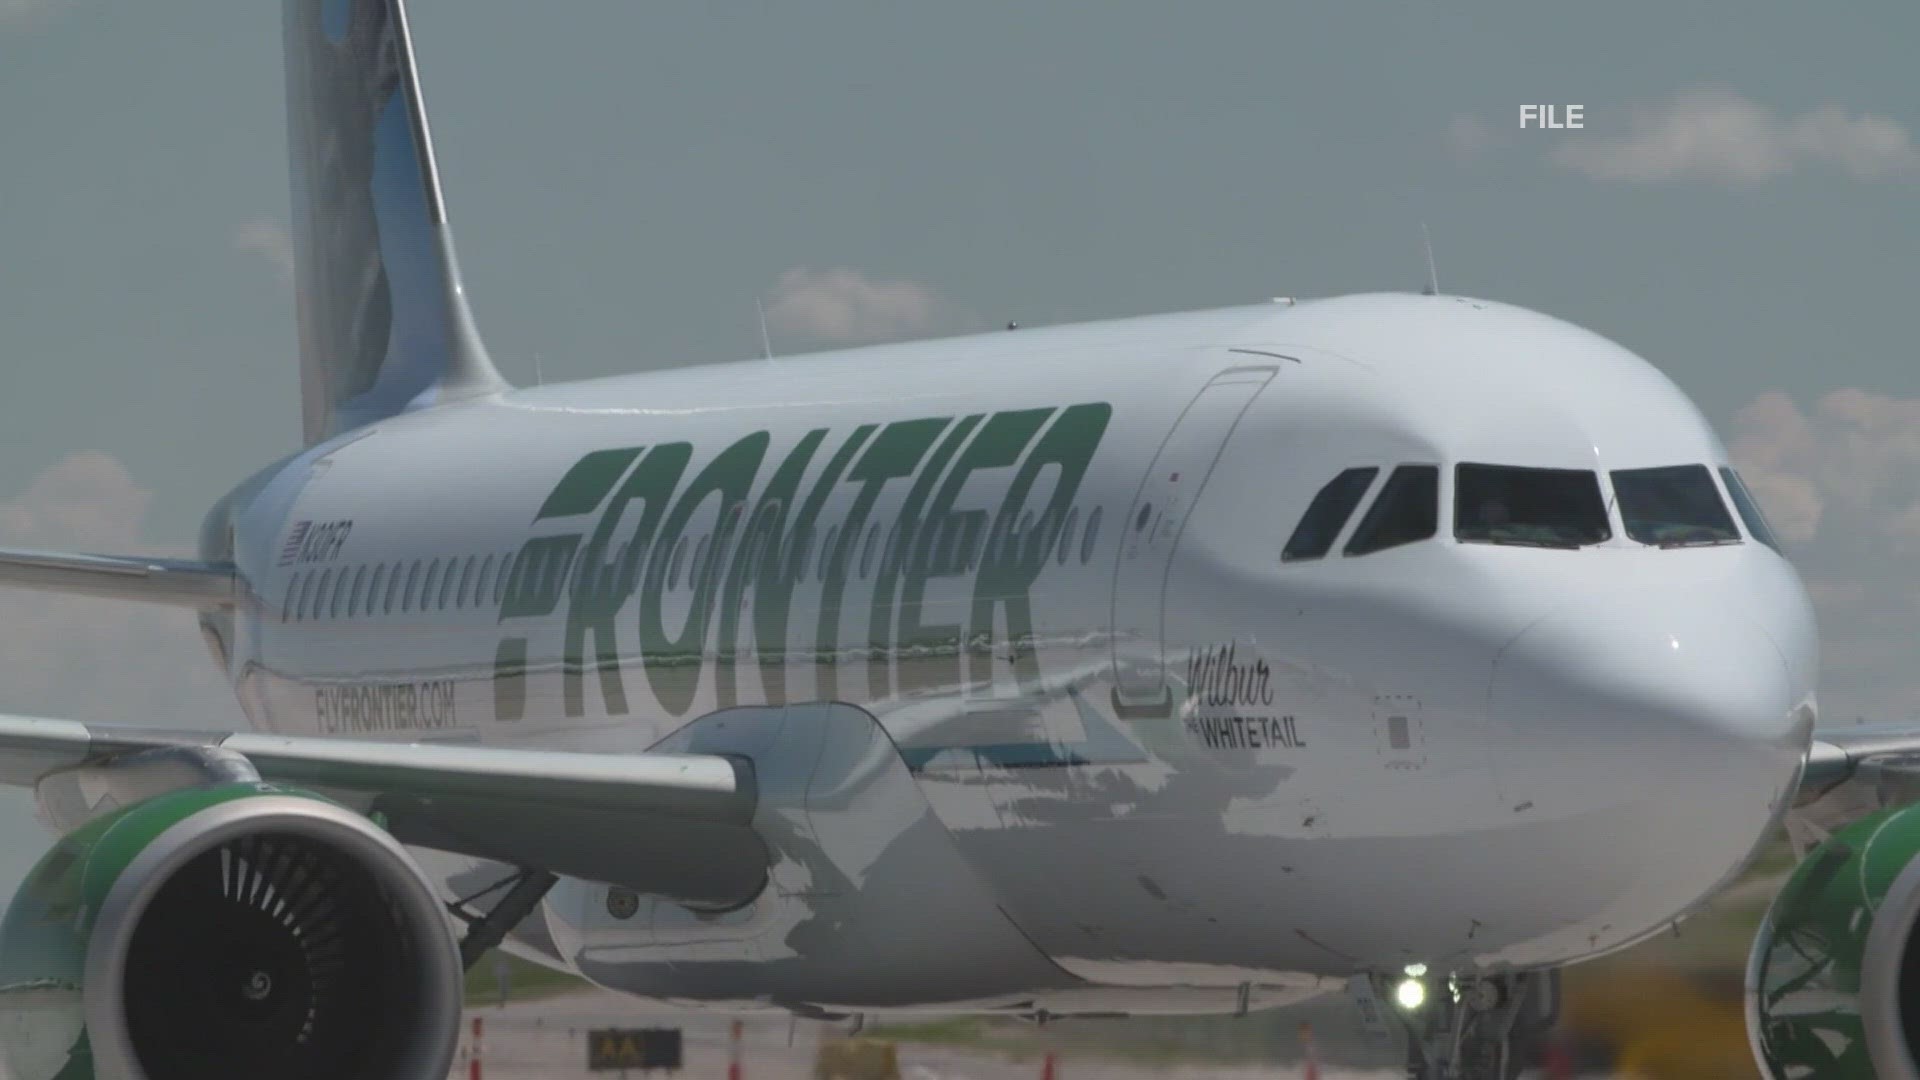 The lawsuit claims Frontier engages in deceptive business practices.